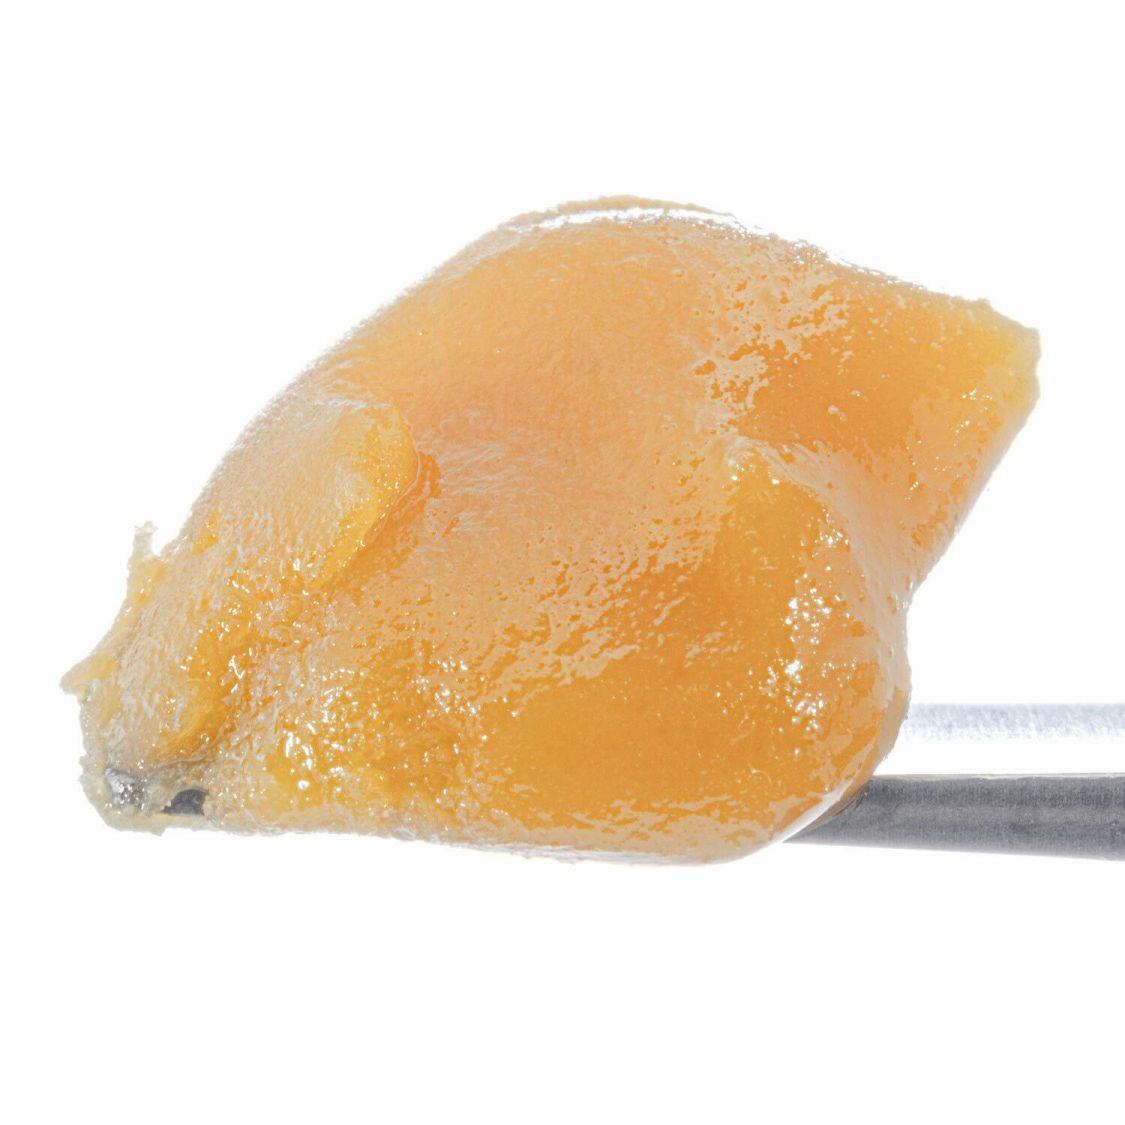 West Coast Cure Cherry Punch Live Resin Badder Concentrates Live Resin Badder